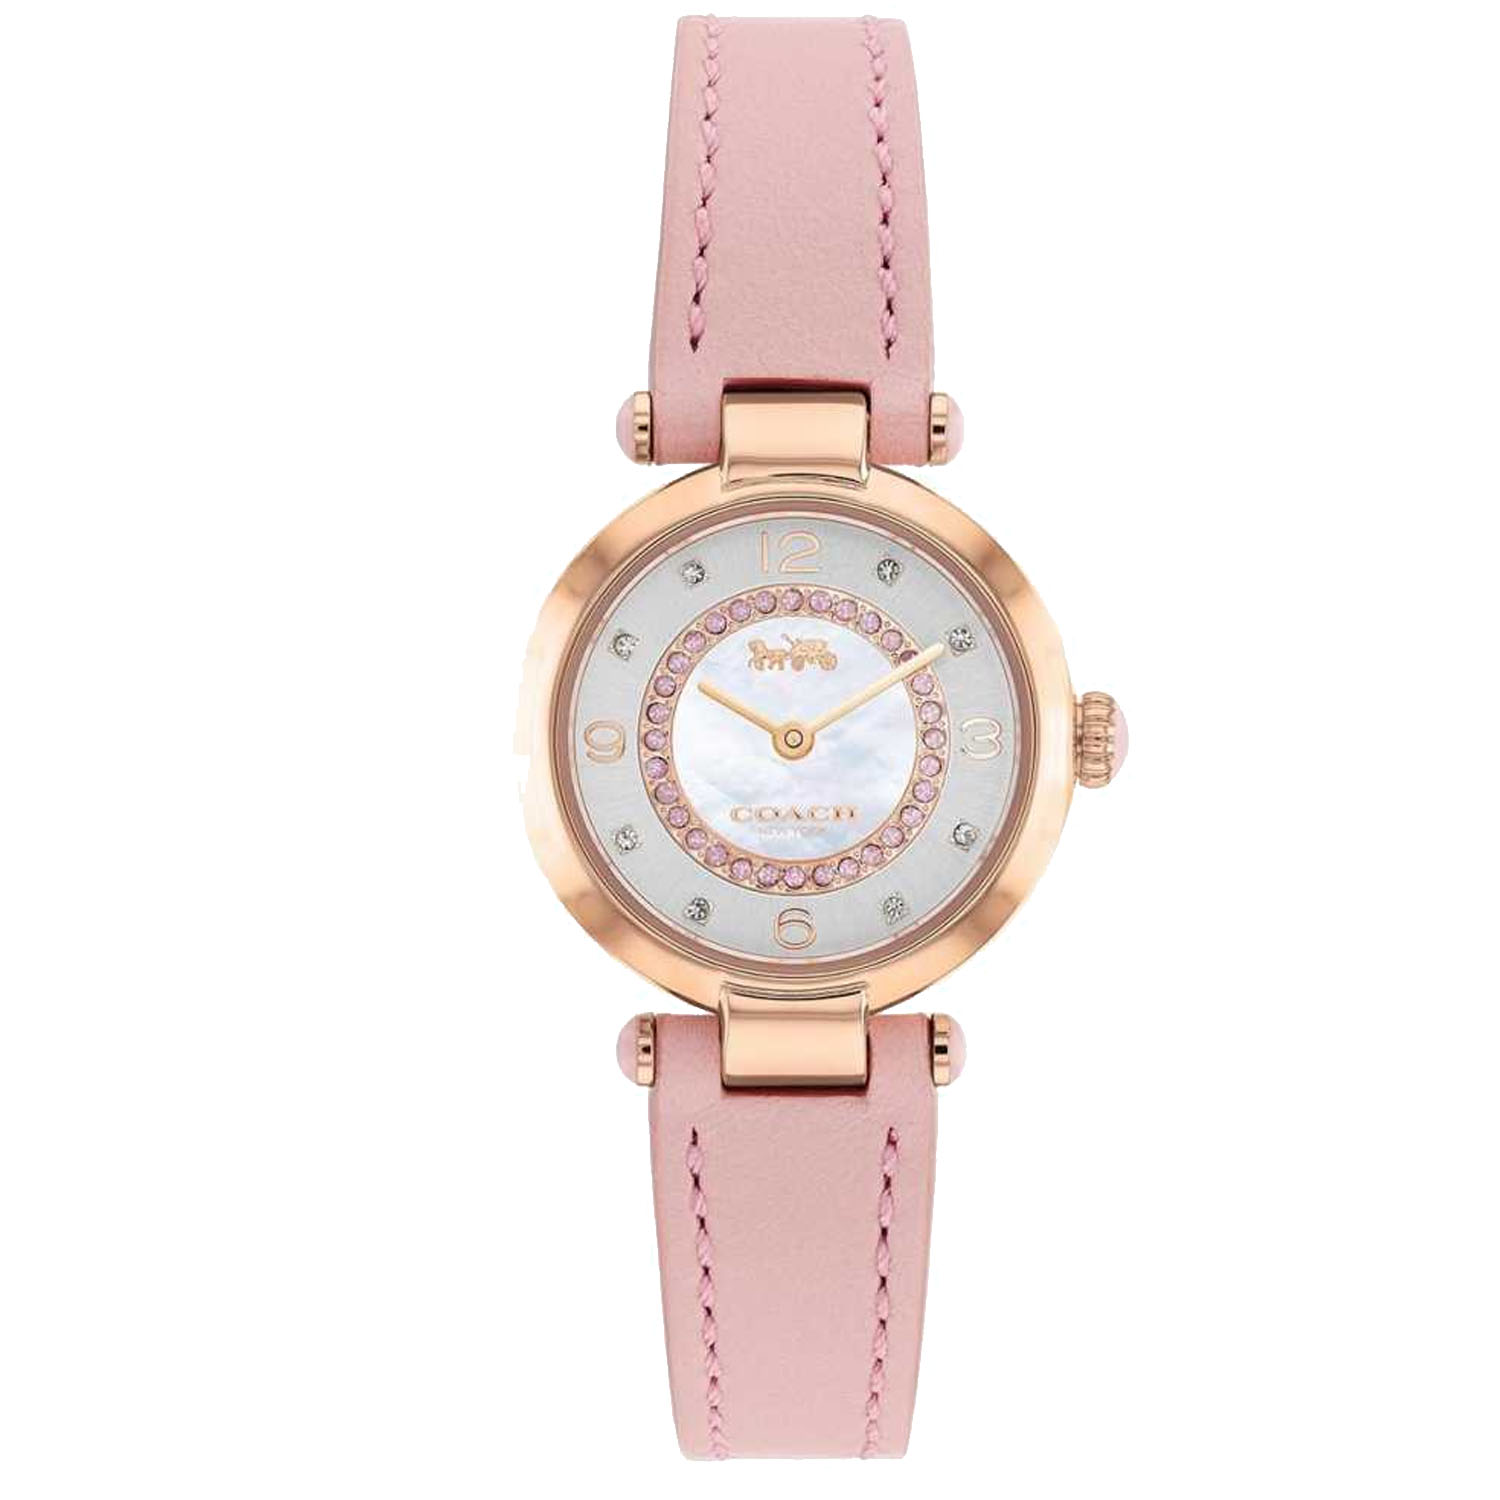 Coach Cary Ladies Watch 14503896